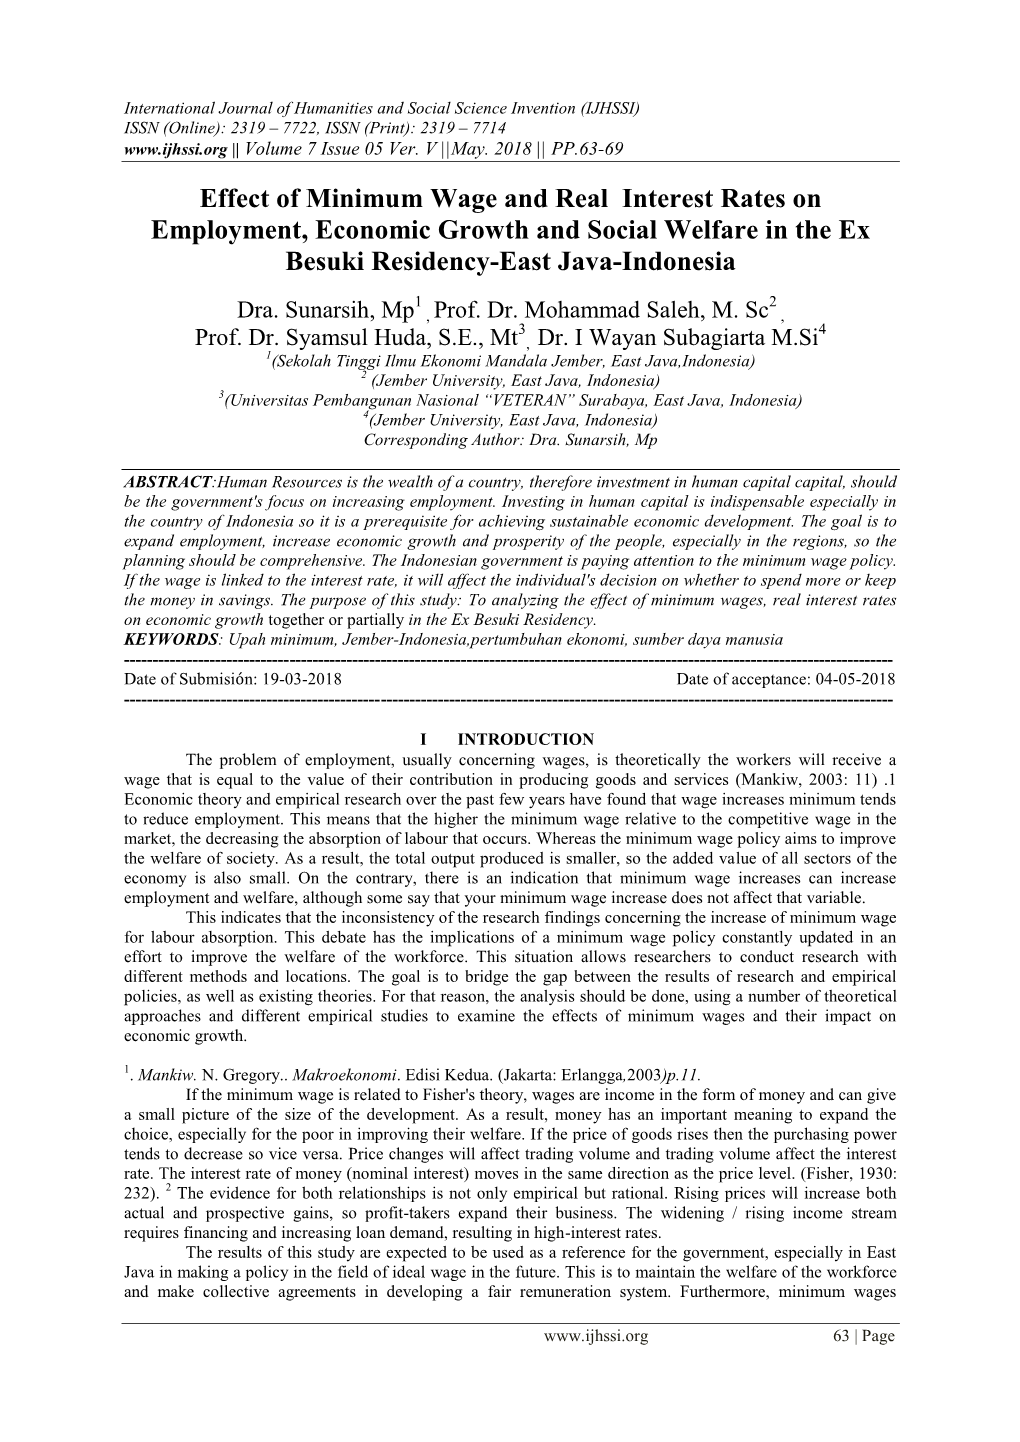 Effect of Minimum Wage and Real Interest Rates on Employment, Economic Growth and Social Welfare in the Ex Besuki Residency-East Java-Indonesia